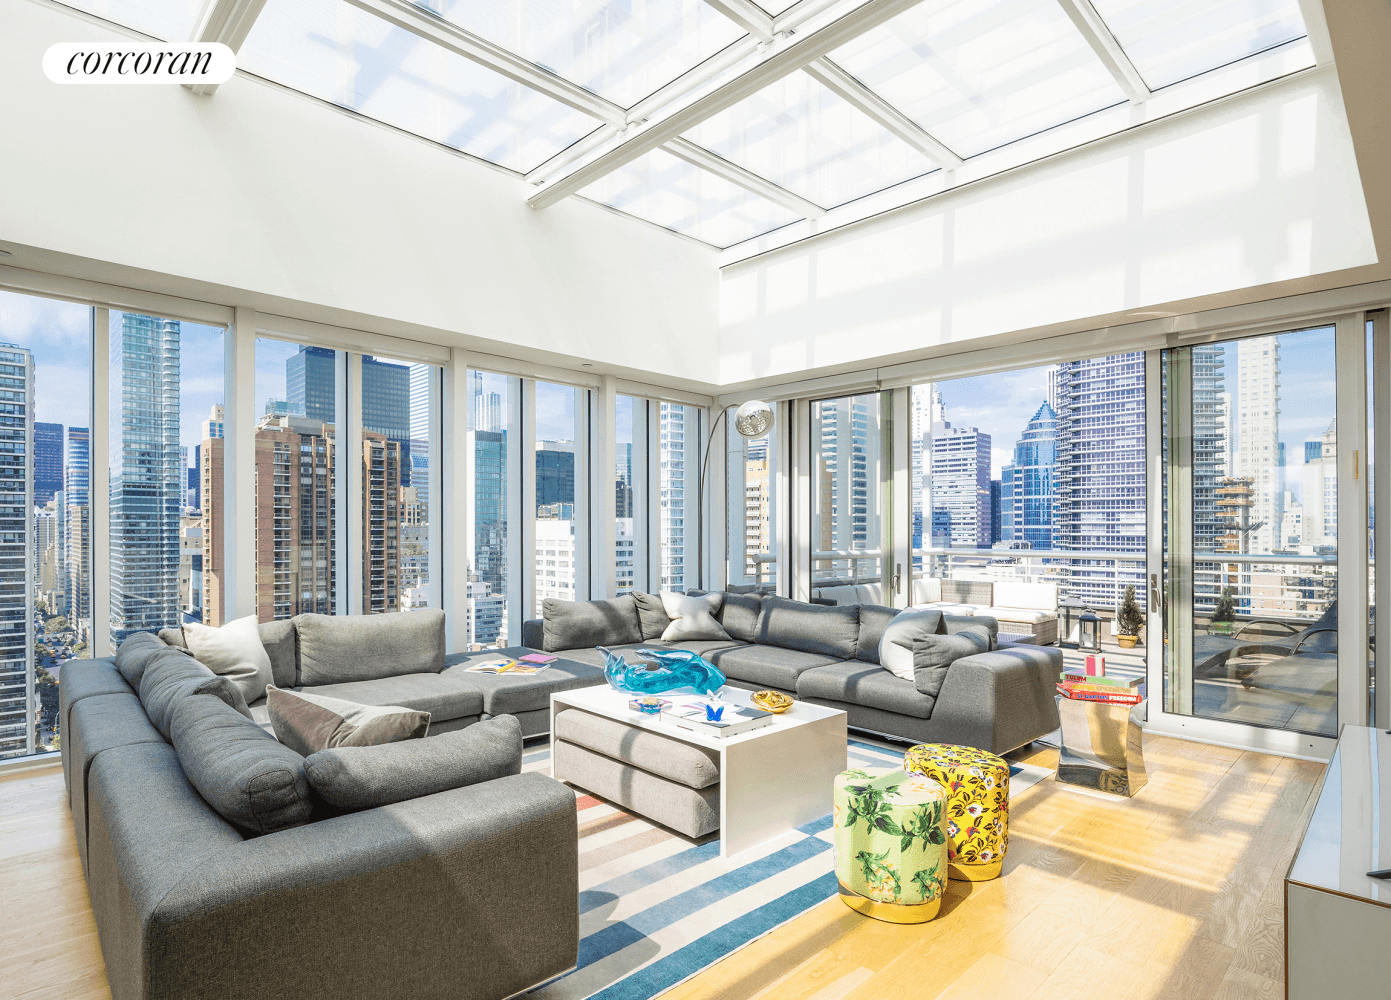 Enjoy the epitome of indoor outdoor living in this stunning four bedroom, four bathroom penthouse featuring three levels of extraordinary outdoor space, contemporary interiors, a massive skylight and spectacular 360 ...